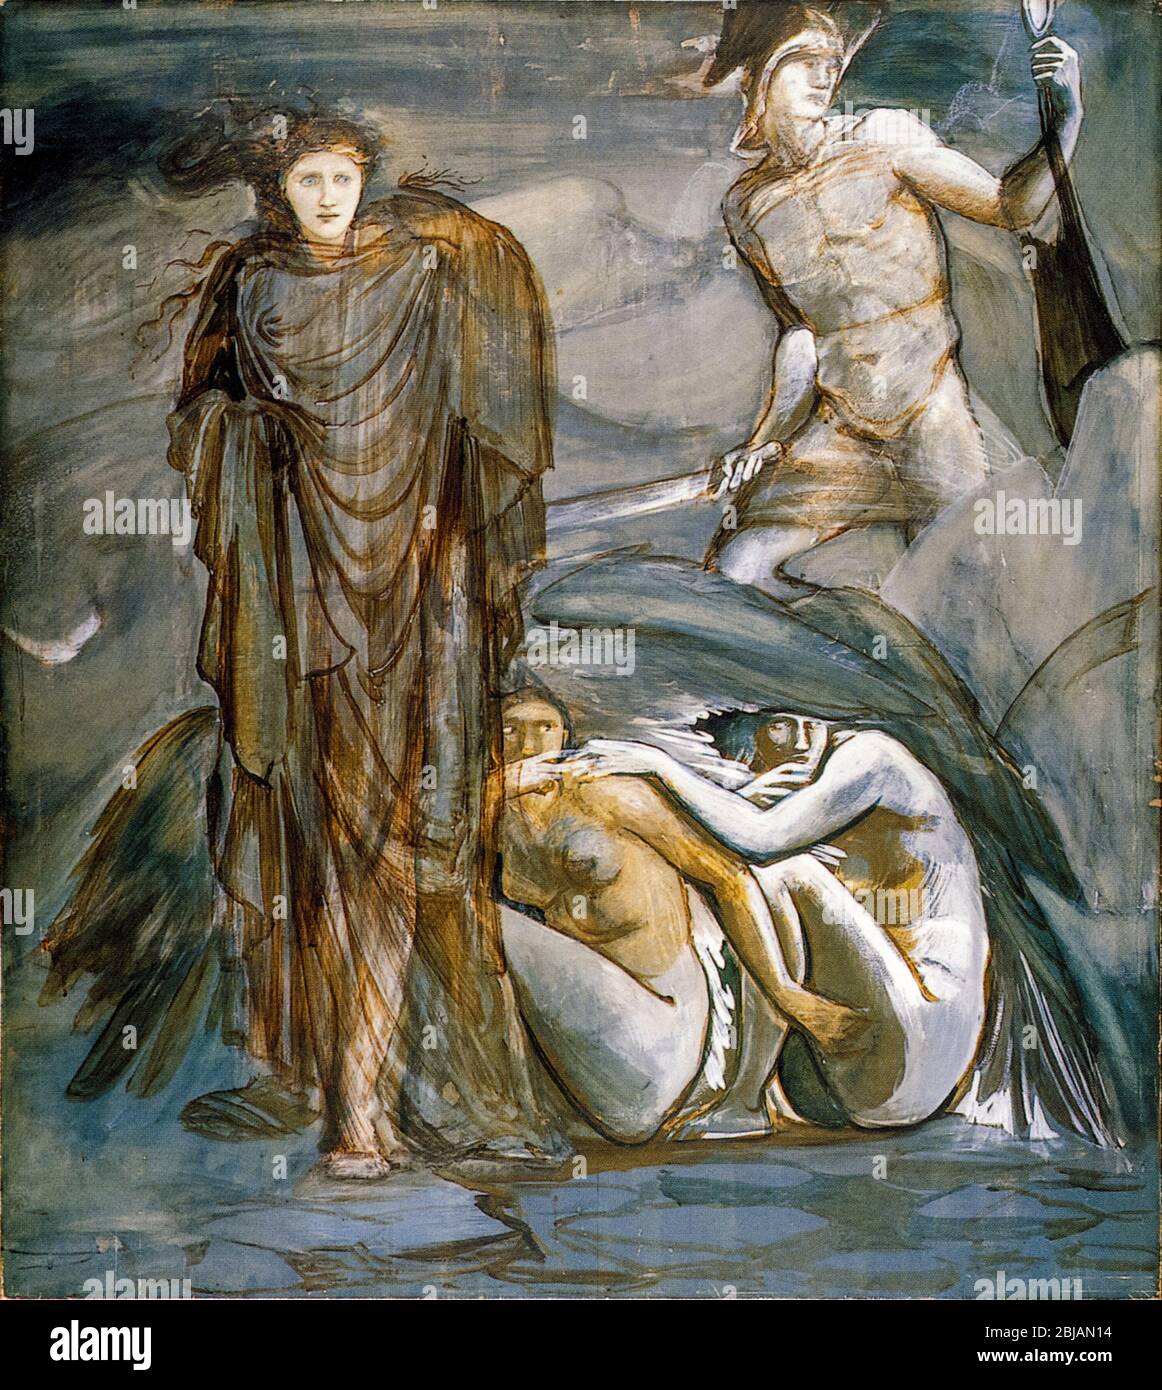 Edward Burne-Jones, The Perseus Series: The Finding of Medusa, painting, 1882 Stock Photo